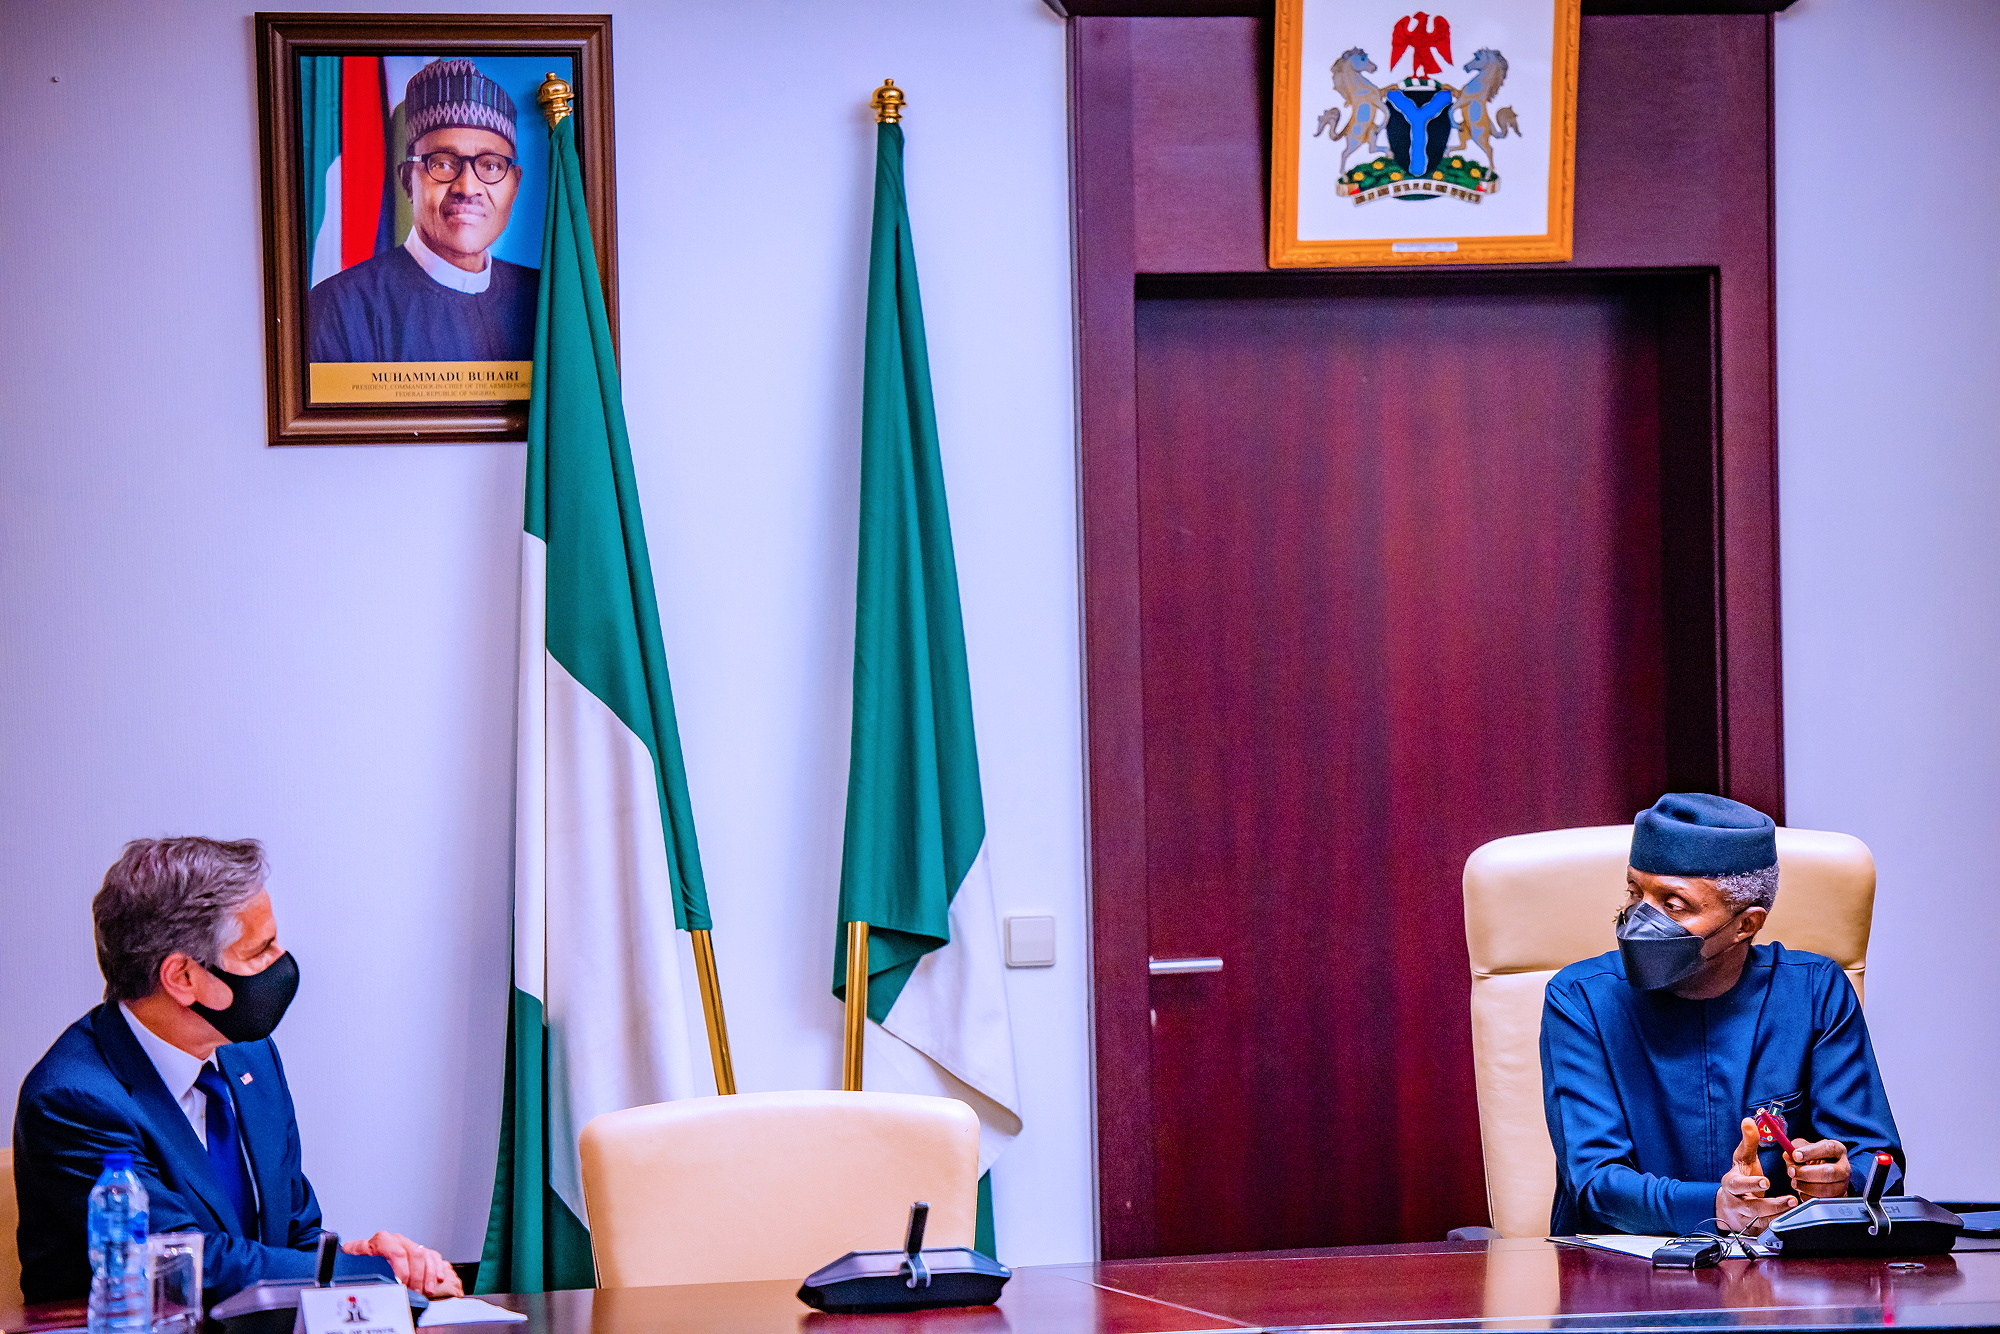 Vice President Yemi Osinbajo and United States Secretary of State Anthony Blinken talks during an audience in the State House in Abuja, Nigeria November 18, 2021. Nigerian Presidency/Handout via REUTERS